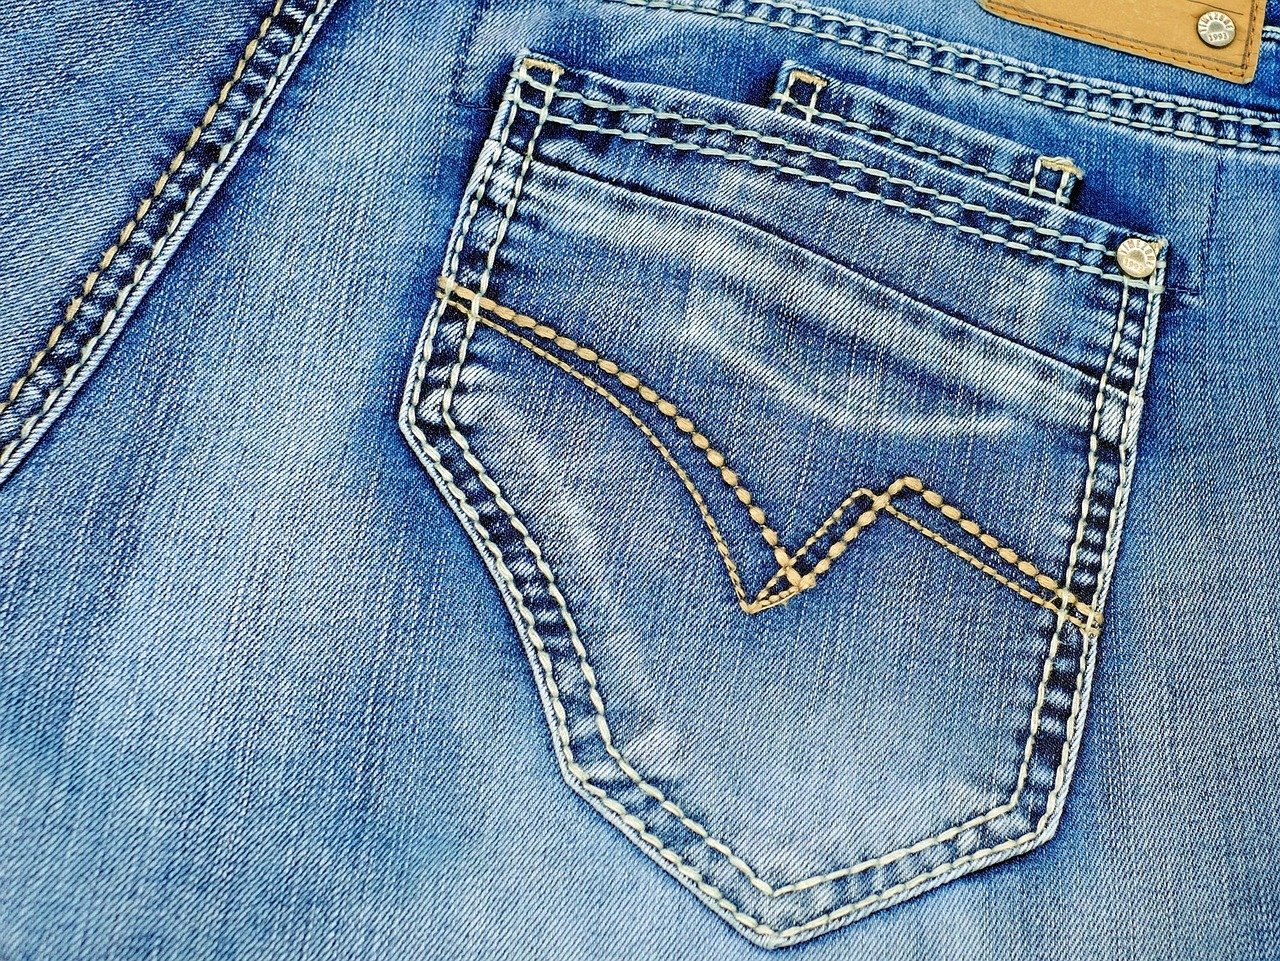 Worn out blue jeans.